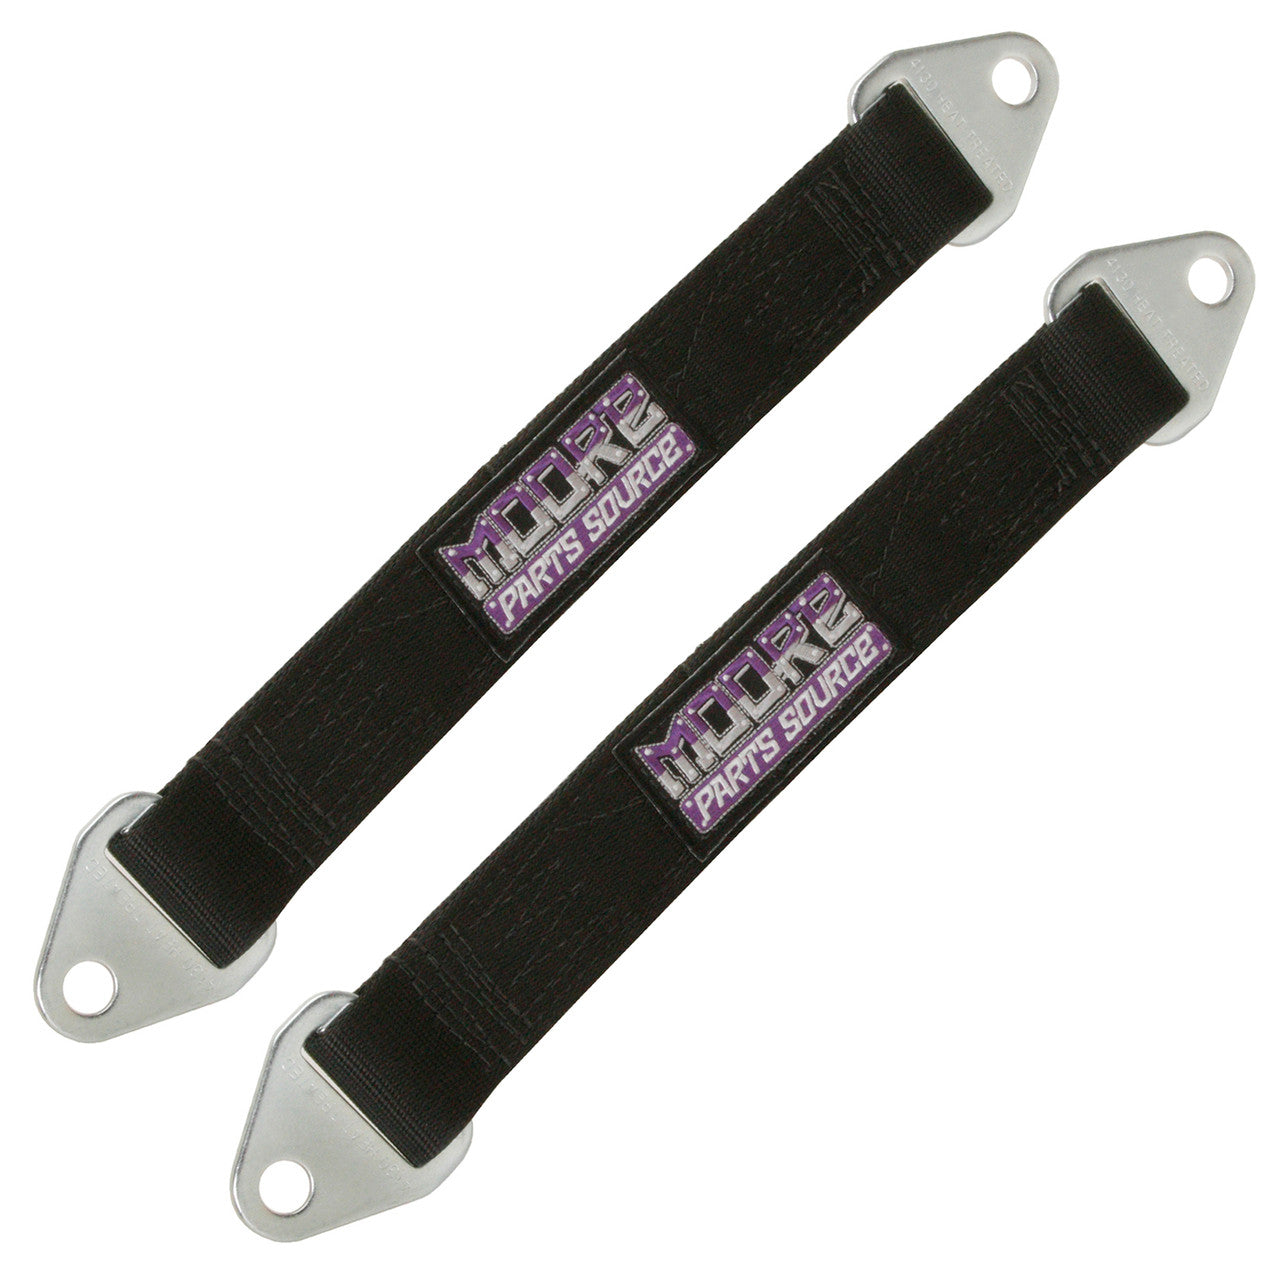 28 Inch USA Made Off-Road Suspension Limit Straps, Sold As Pair